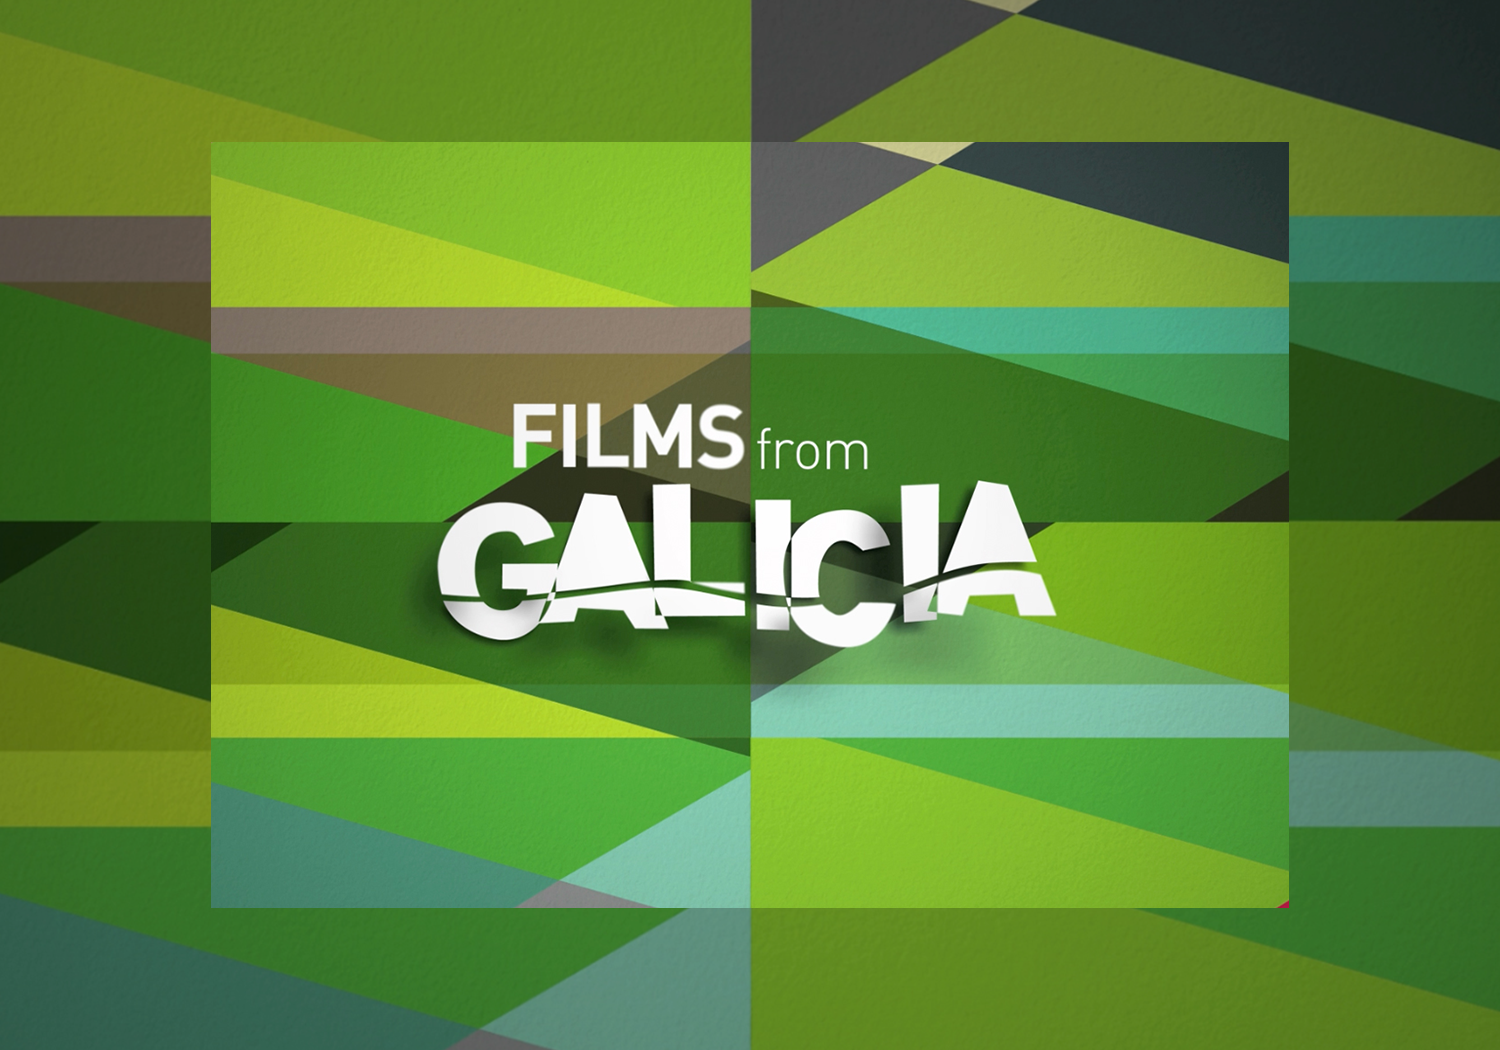 FILMS FROM GALICIA